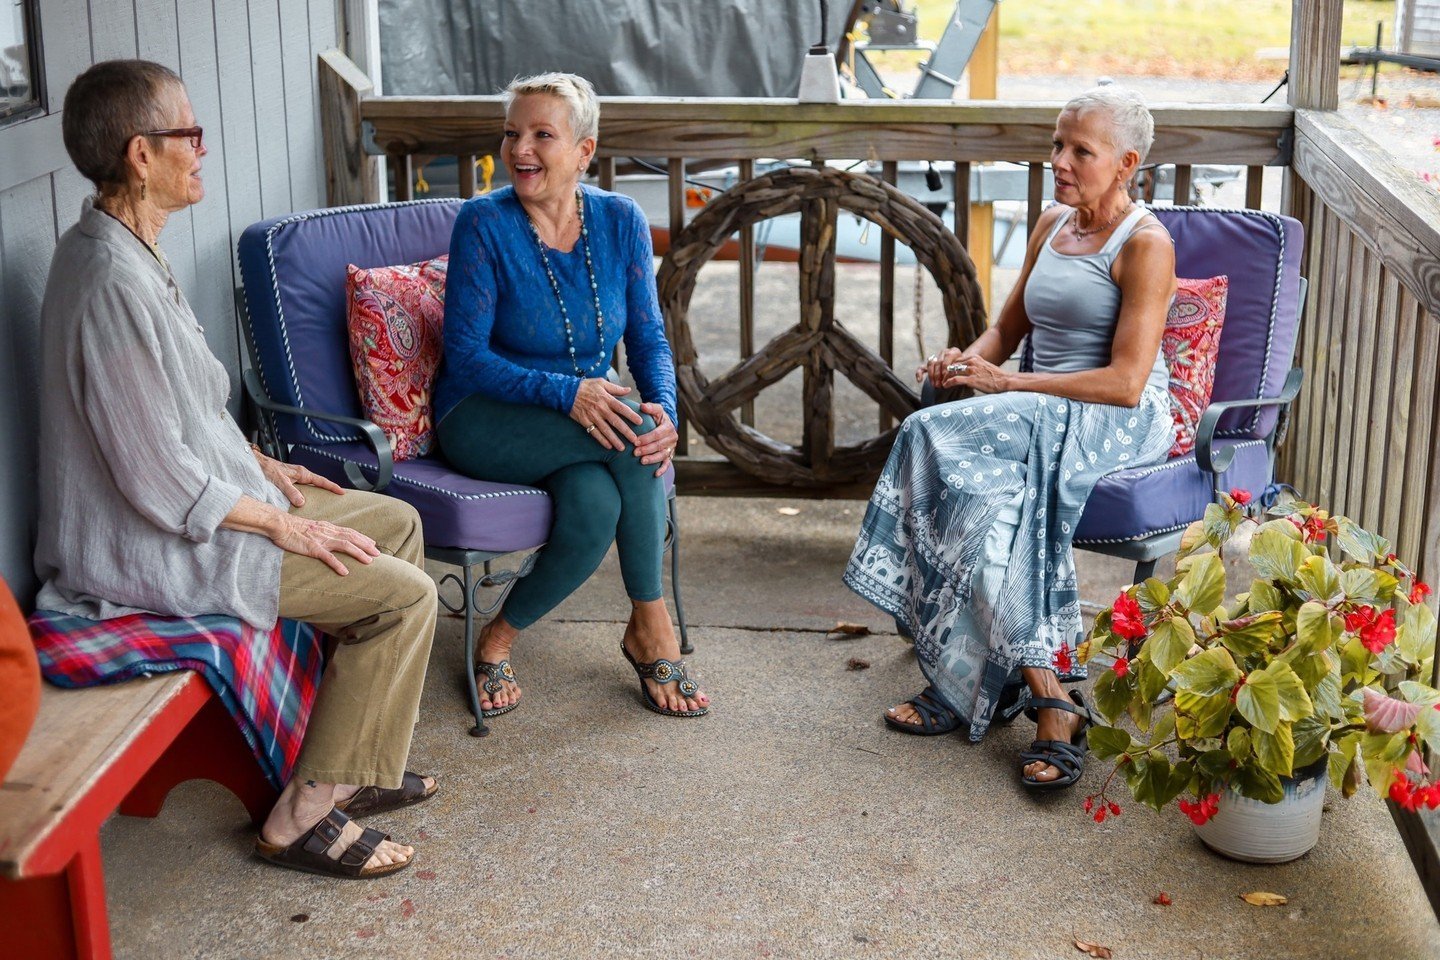 Spring breezes and joyful ease. Unwinding on the porch after a hot yoga session. This is how we embrace the season at Synergy! Flow with friends at tonight's 5:30 PM community class and enjoy the perfect porch hang.